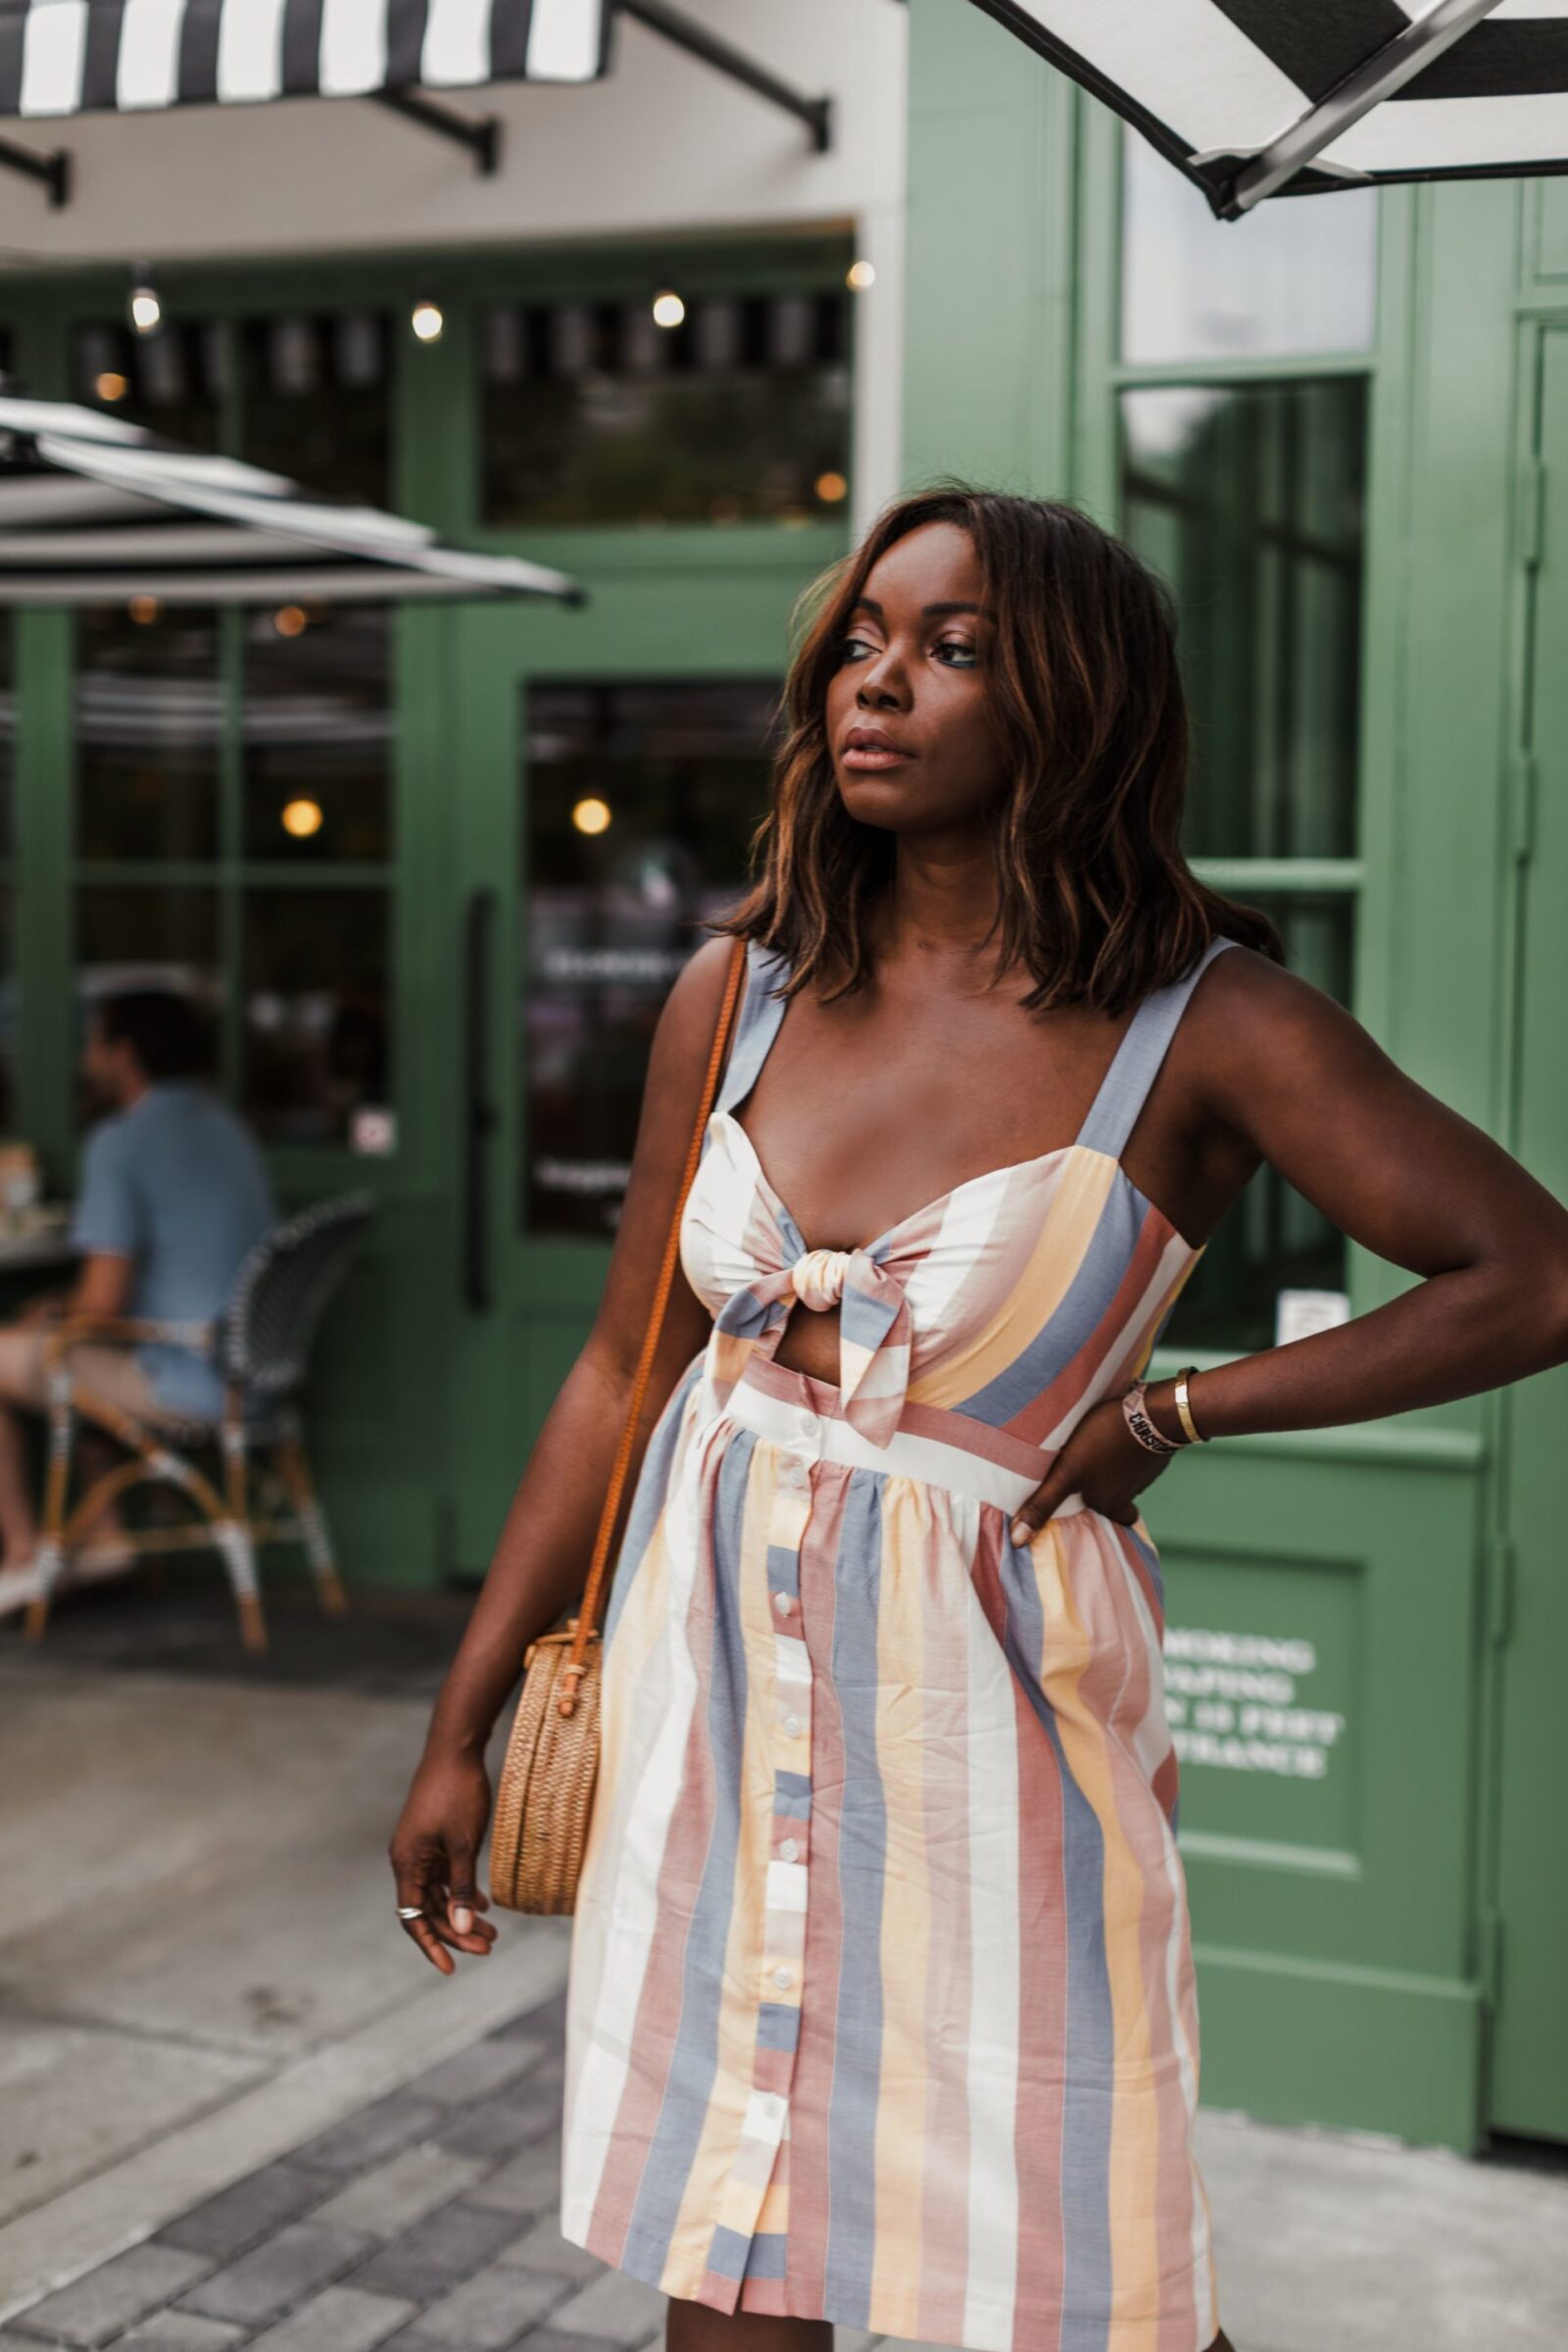 https://cocobassey.com/wp-content/uploads/2018/07/Rainbow-Dress-Madewell-Sherbet-Stripe-How-to-Rock-a-Rainbow-Print-MILLENNIELLE-Lifestyle-Fashion-Blog-4-of-10-1600x2400.jpg